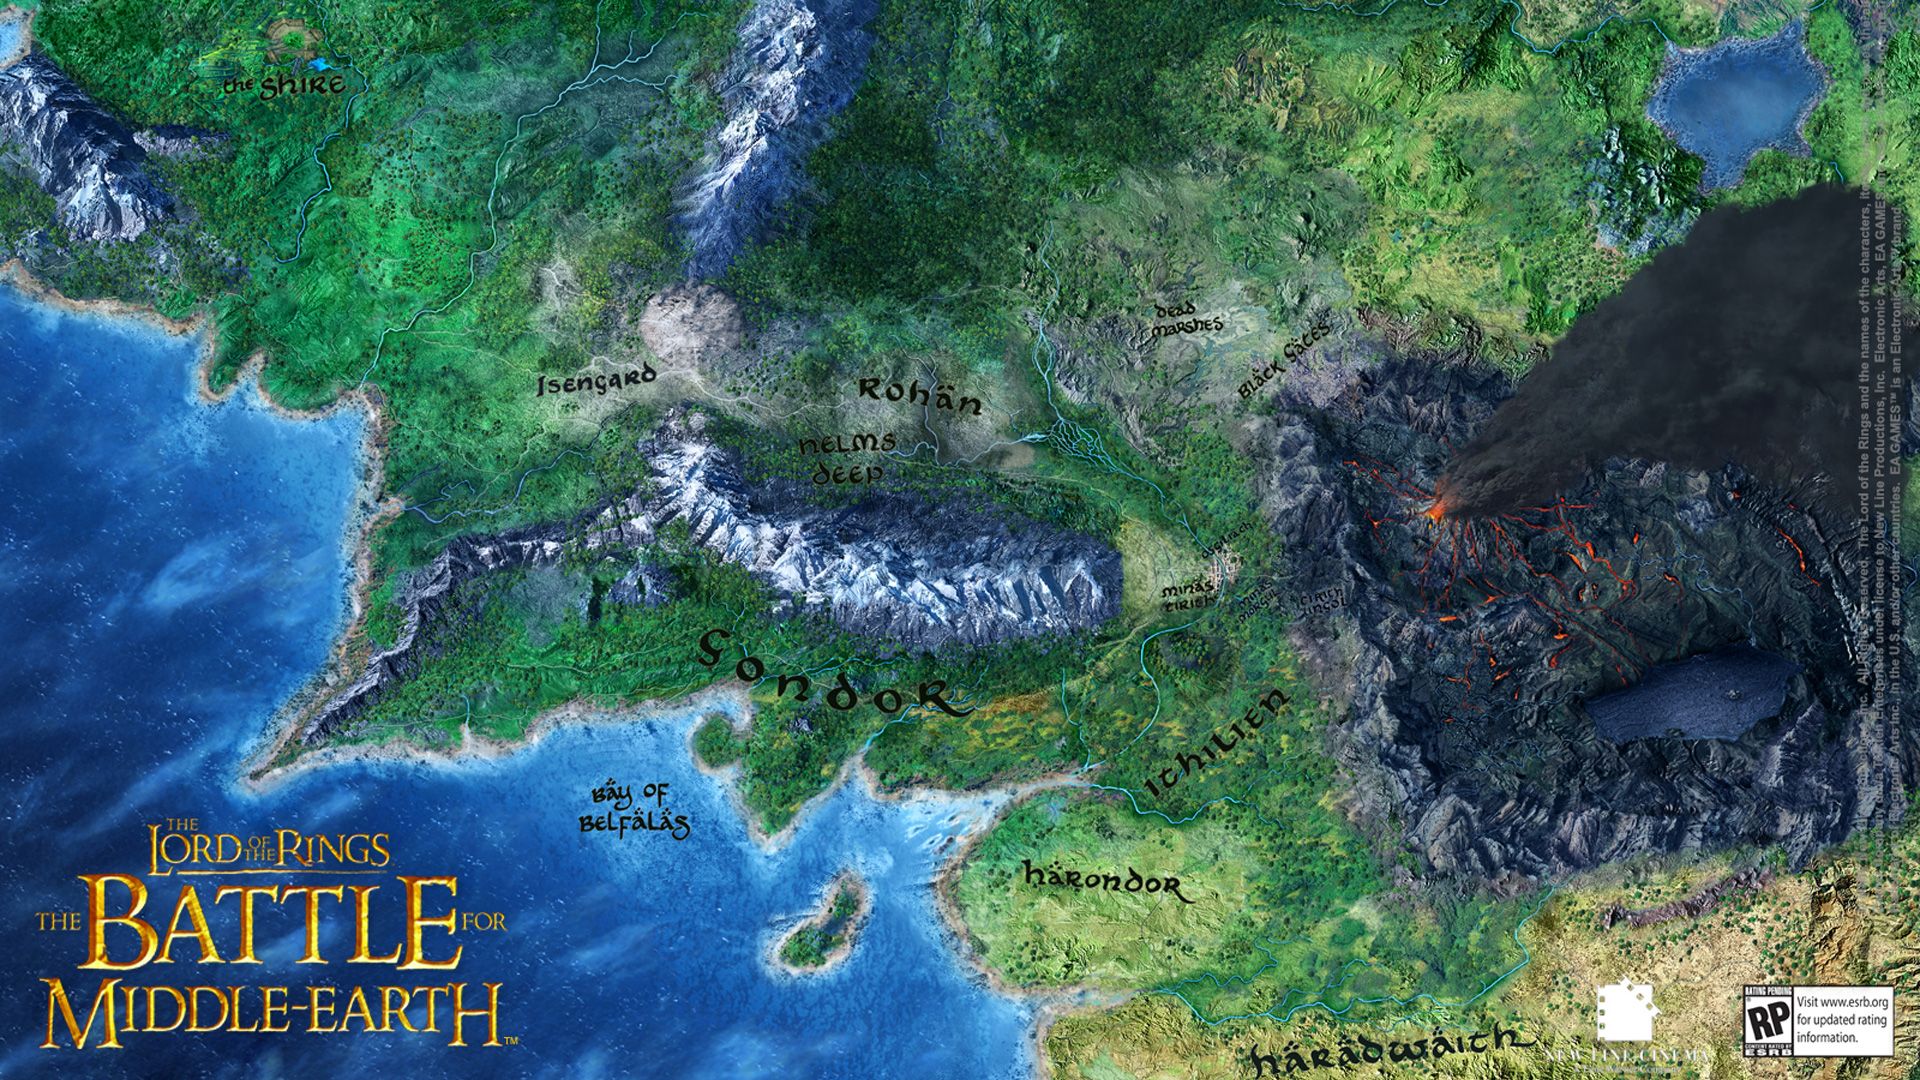 Free The Lord Of The Rings: The Battle For Middle Earth Wallpaper In 1920x1080